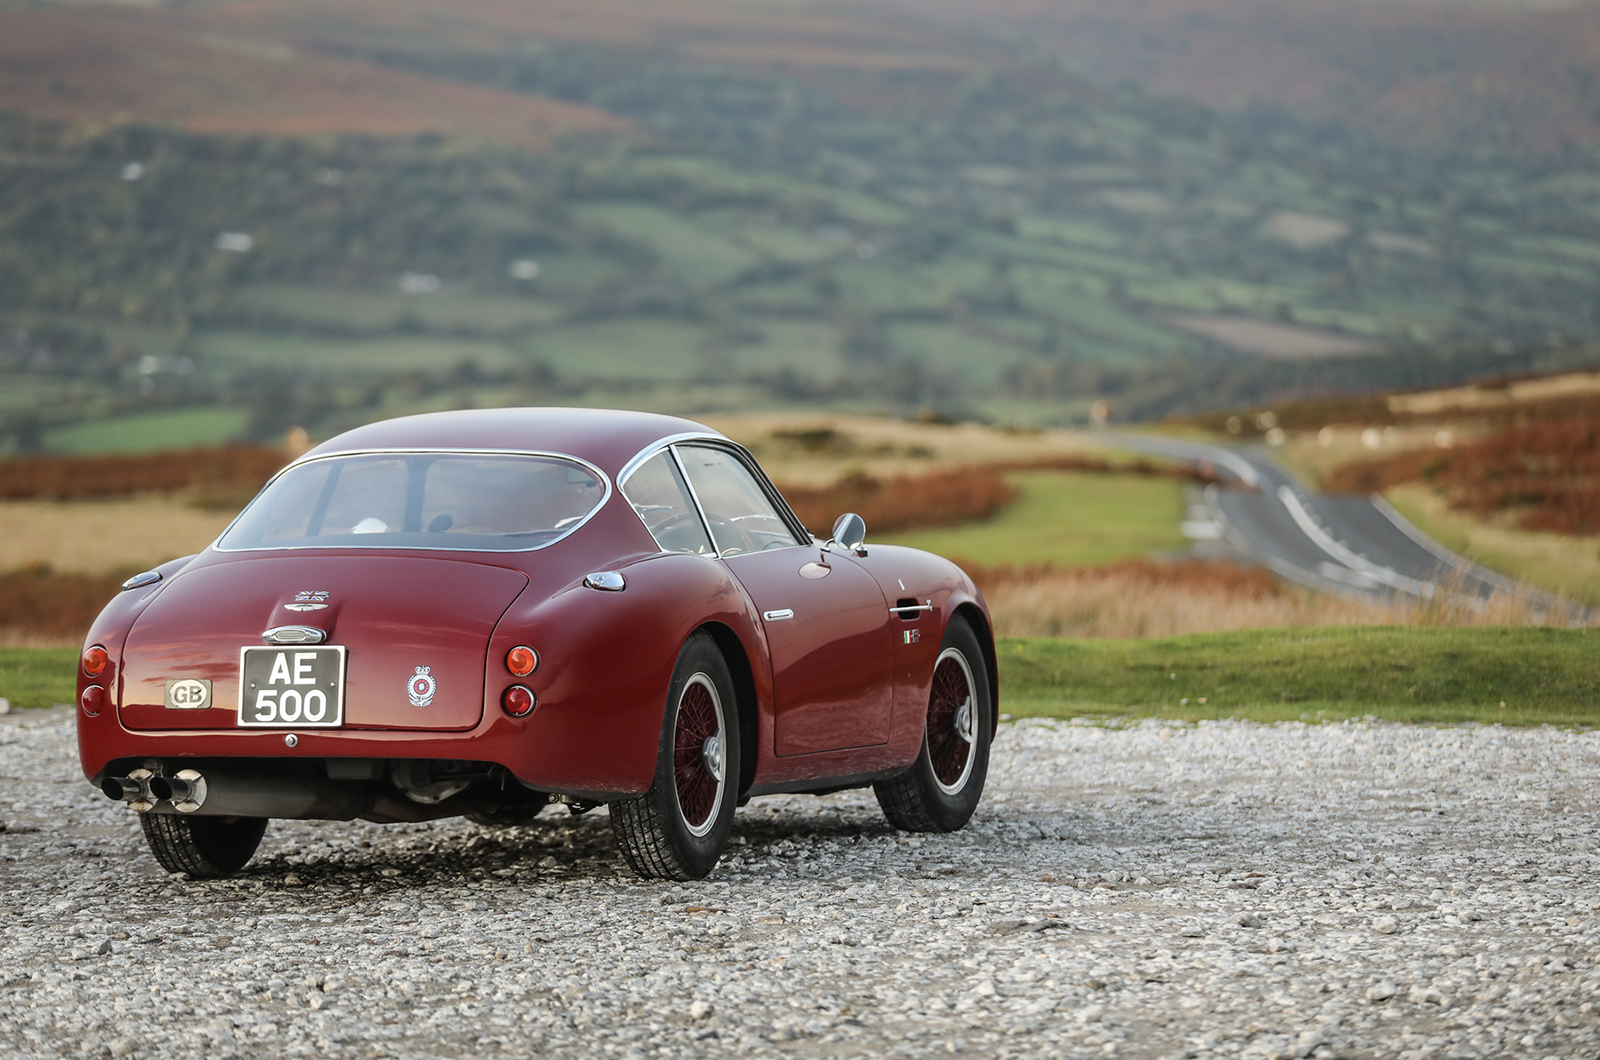 The Aston Martin DB4GT Zagato is valued at £7-9m